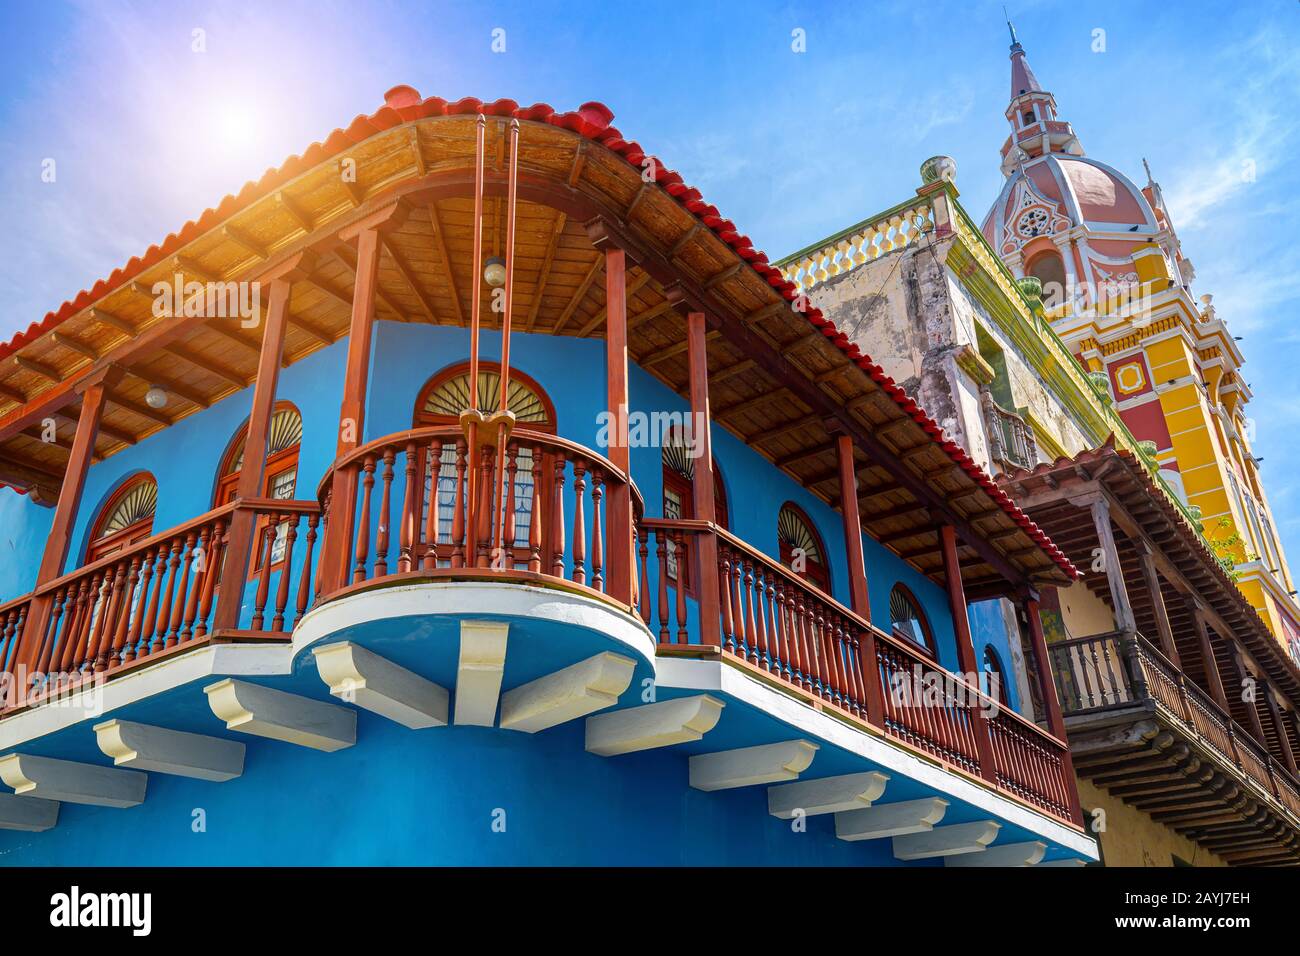 Famous colonial Cartagena Walled City (Cuidad Amurrallada) and its colorful buildings in historic city center, designated a UNESCO World Heritage Site Stock Photo